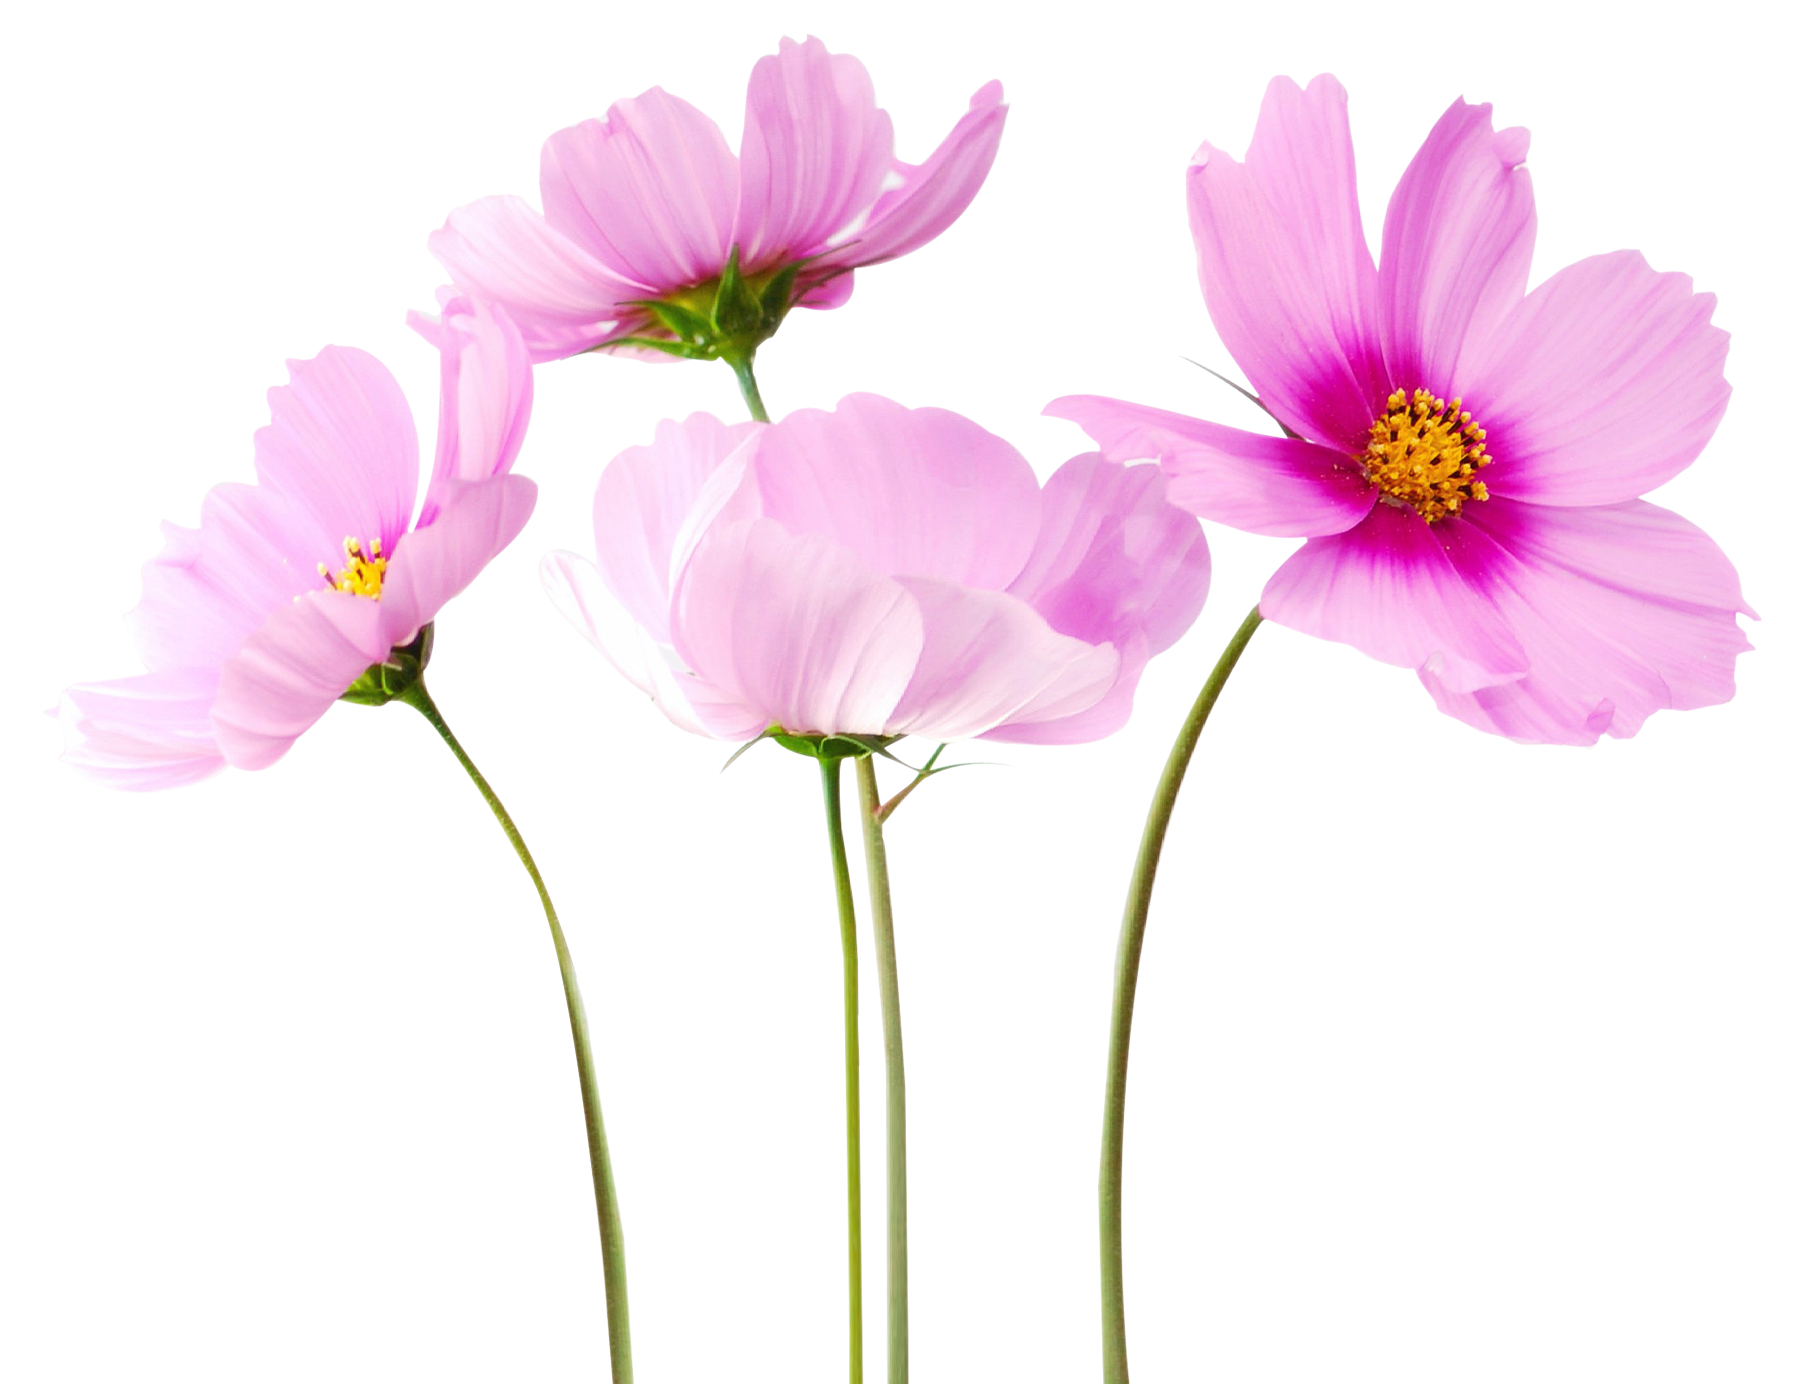 Transparent flower Free Stock Photos, Images, and Pictures of